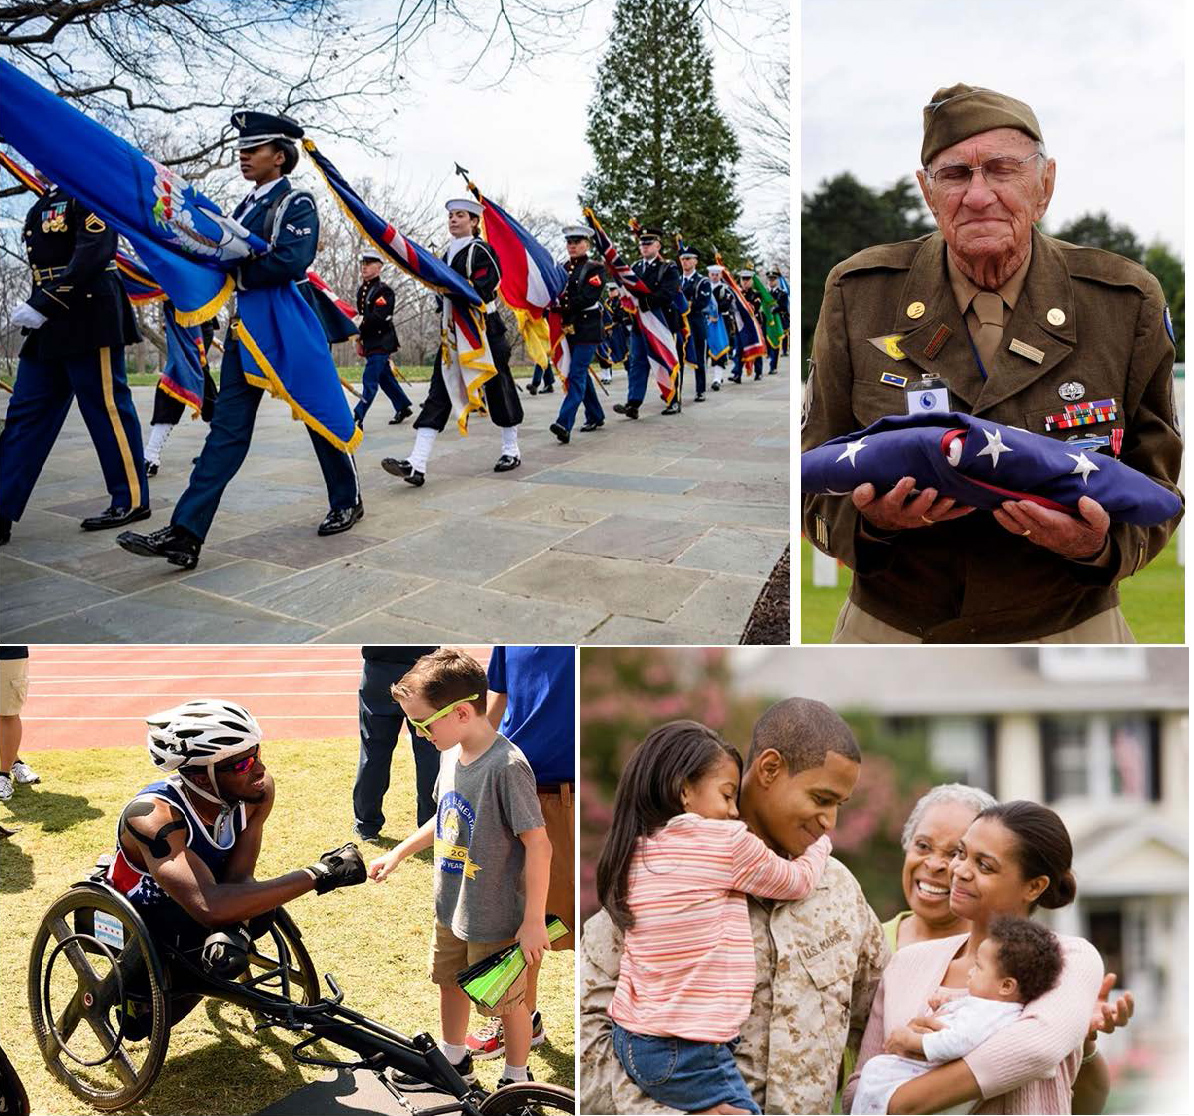 A collage of four pictures. From top left and clockwise: a formation fo Service members in uniform carrying State flags; a World War II Veteran in uniform at a Veterans cemetery holding a U.S. tri-fold presentation flag; a post 9/11 Veteran, double leg amputee sitting in a 3-wheel recumbent racing trike fist-bumping a young boy; and a Marind Service member in uniform with his two children, wife, and mother.